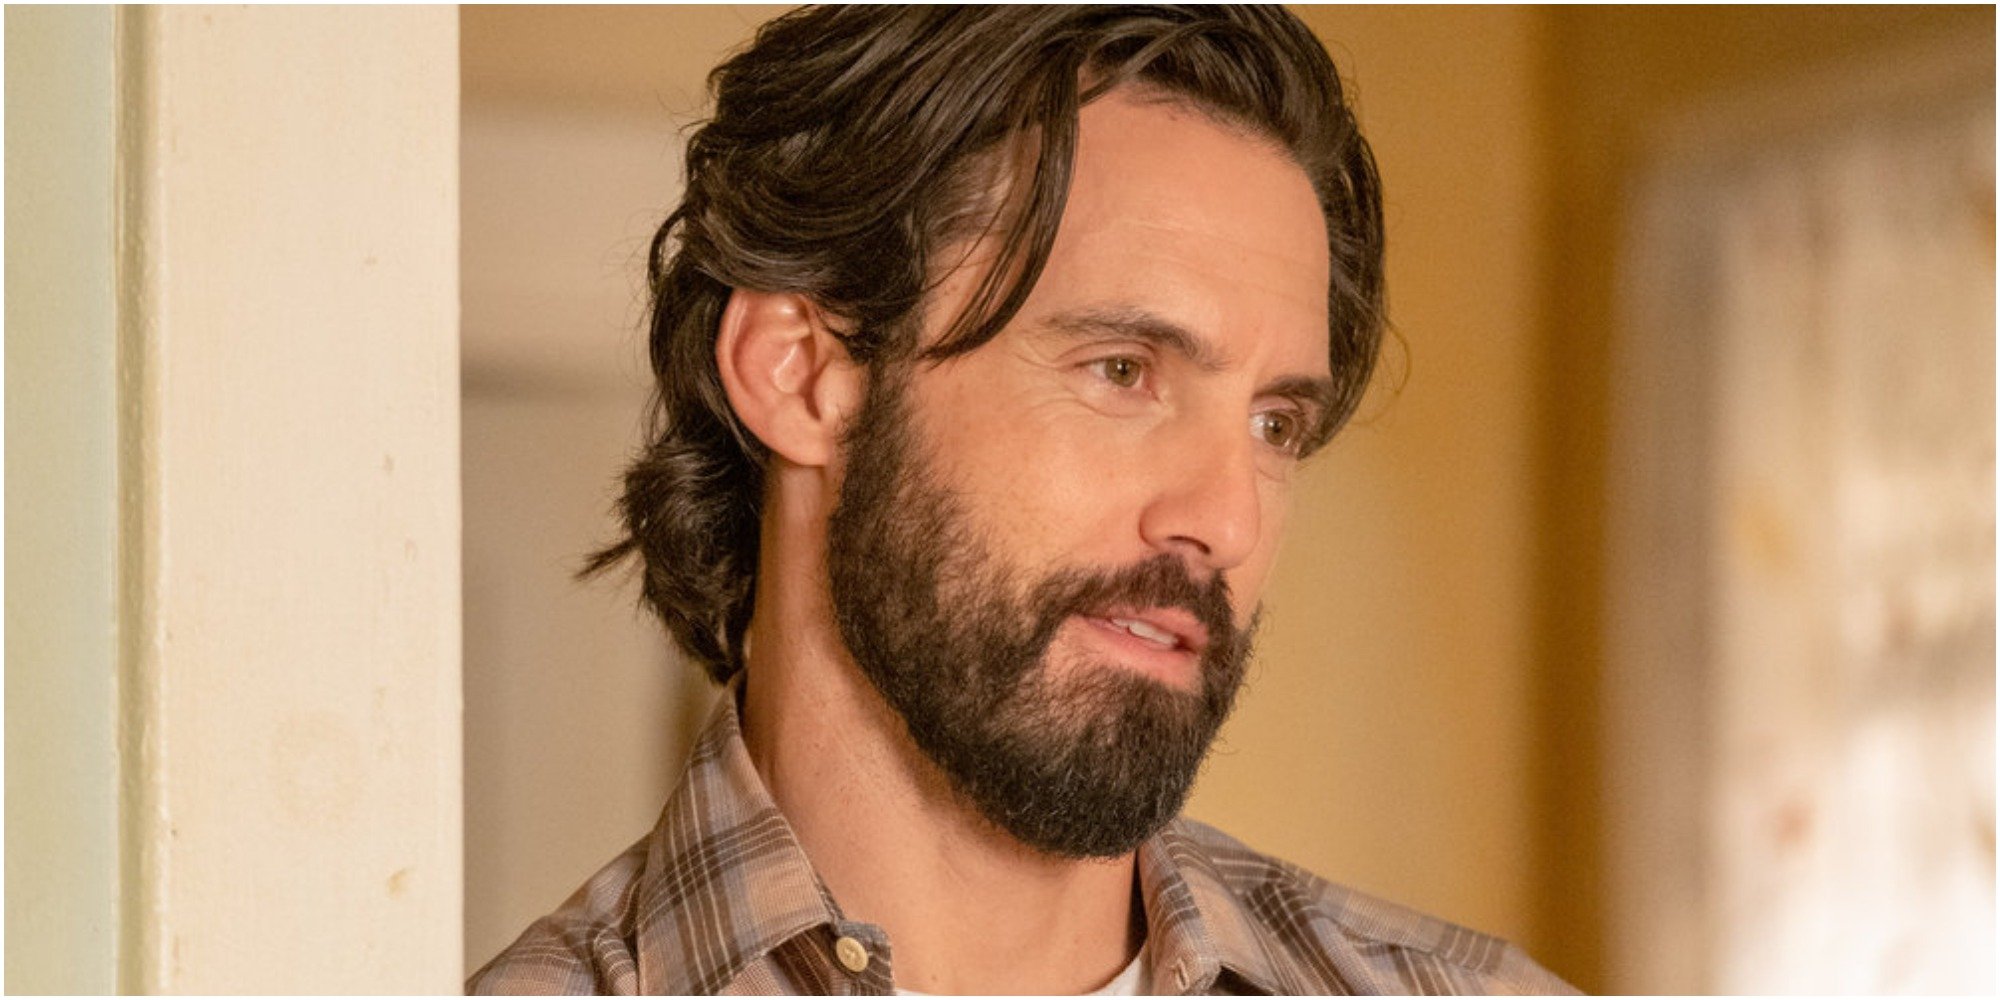 Milo Ventimiglia on the set of This Is Us.